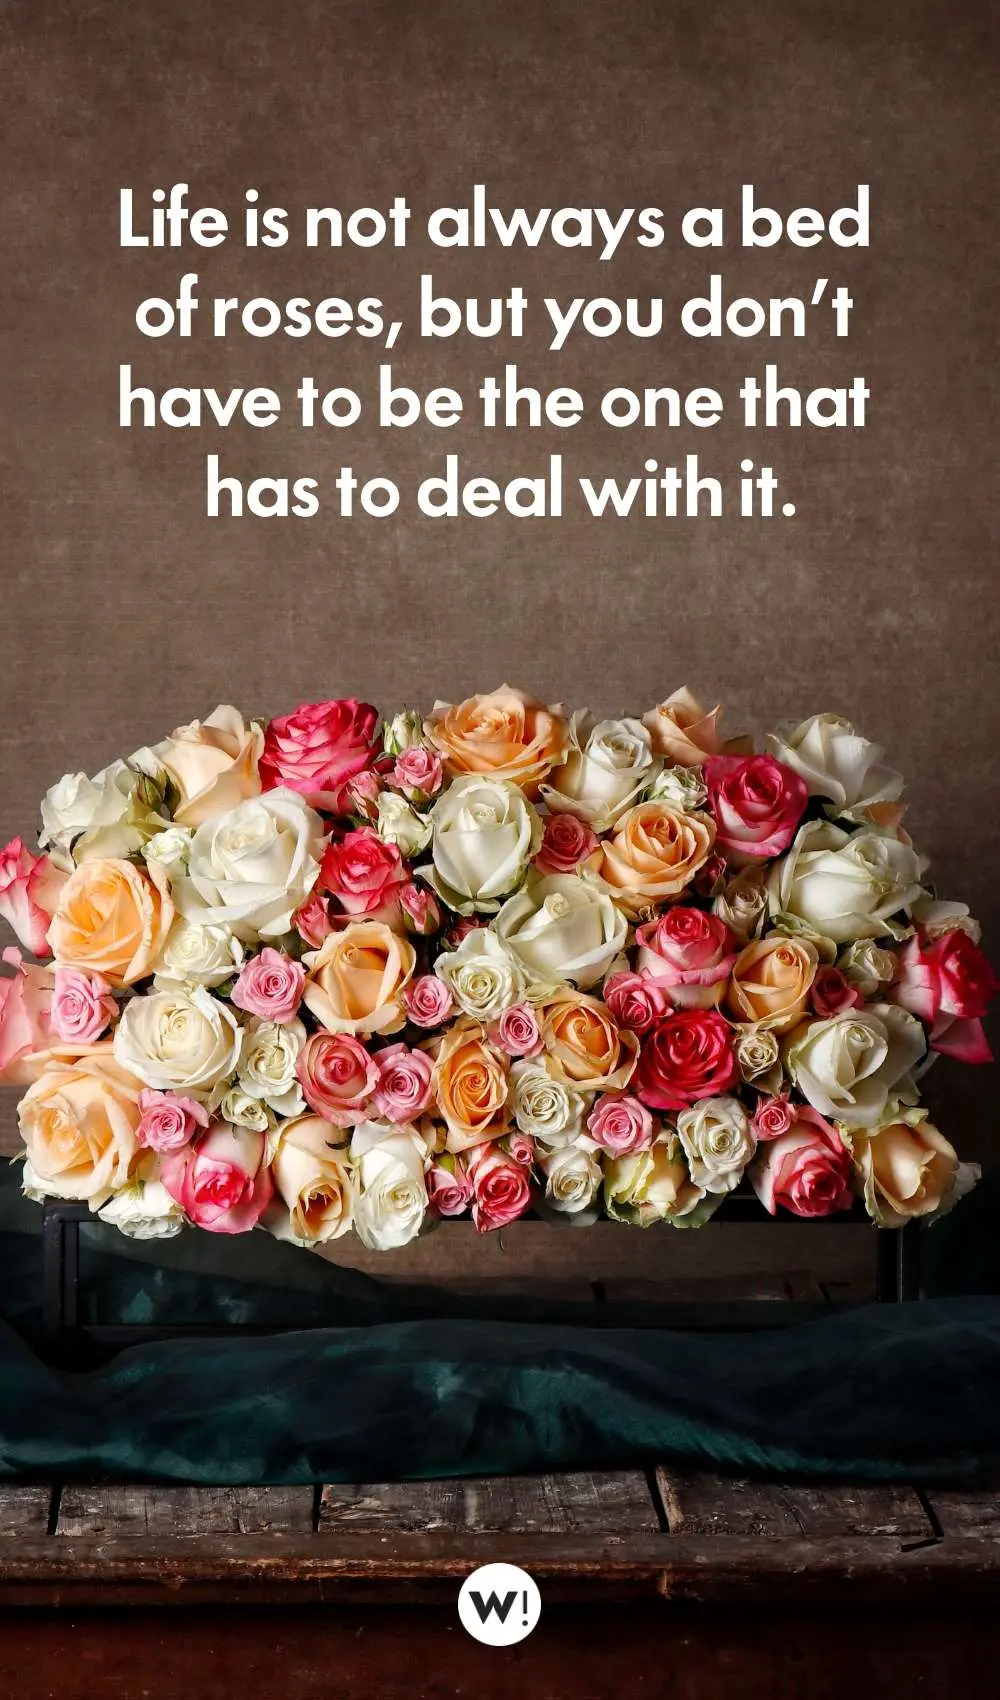 Inspirational Quotes About Roses Life Is Not Always A Bed Of Roses, But You Don’t